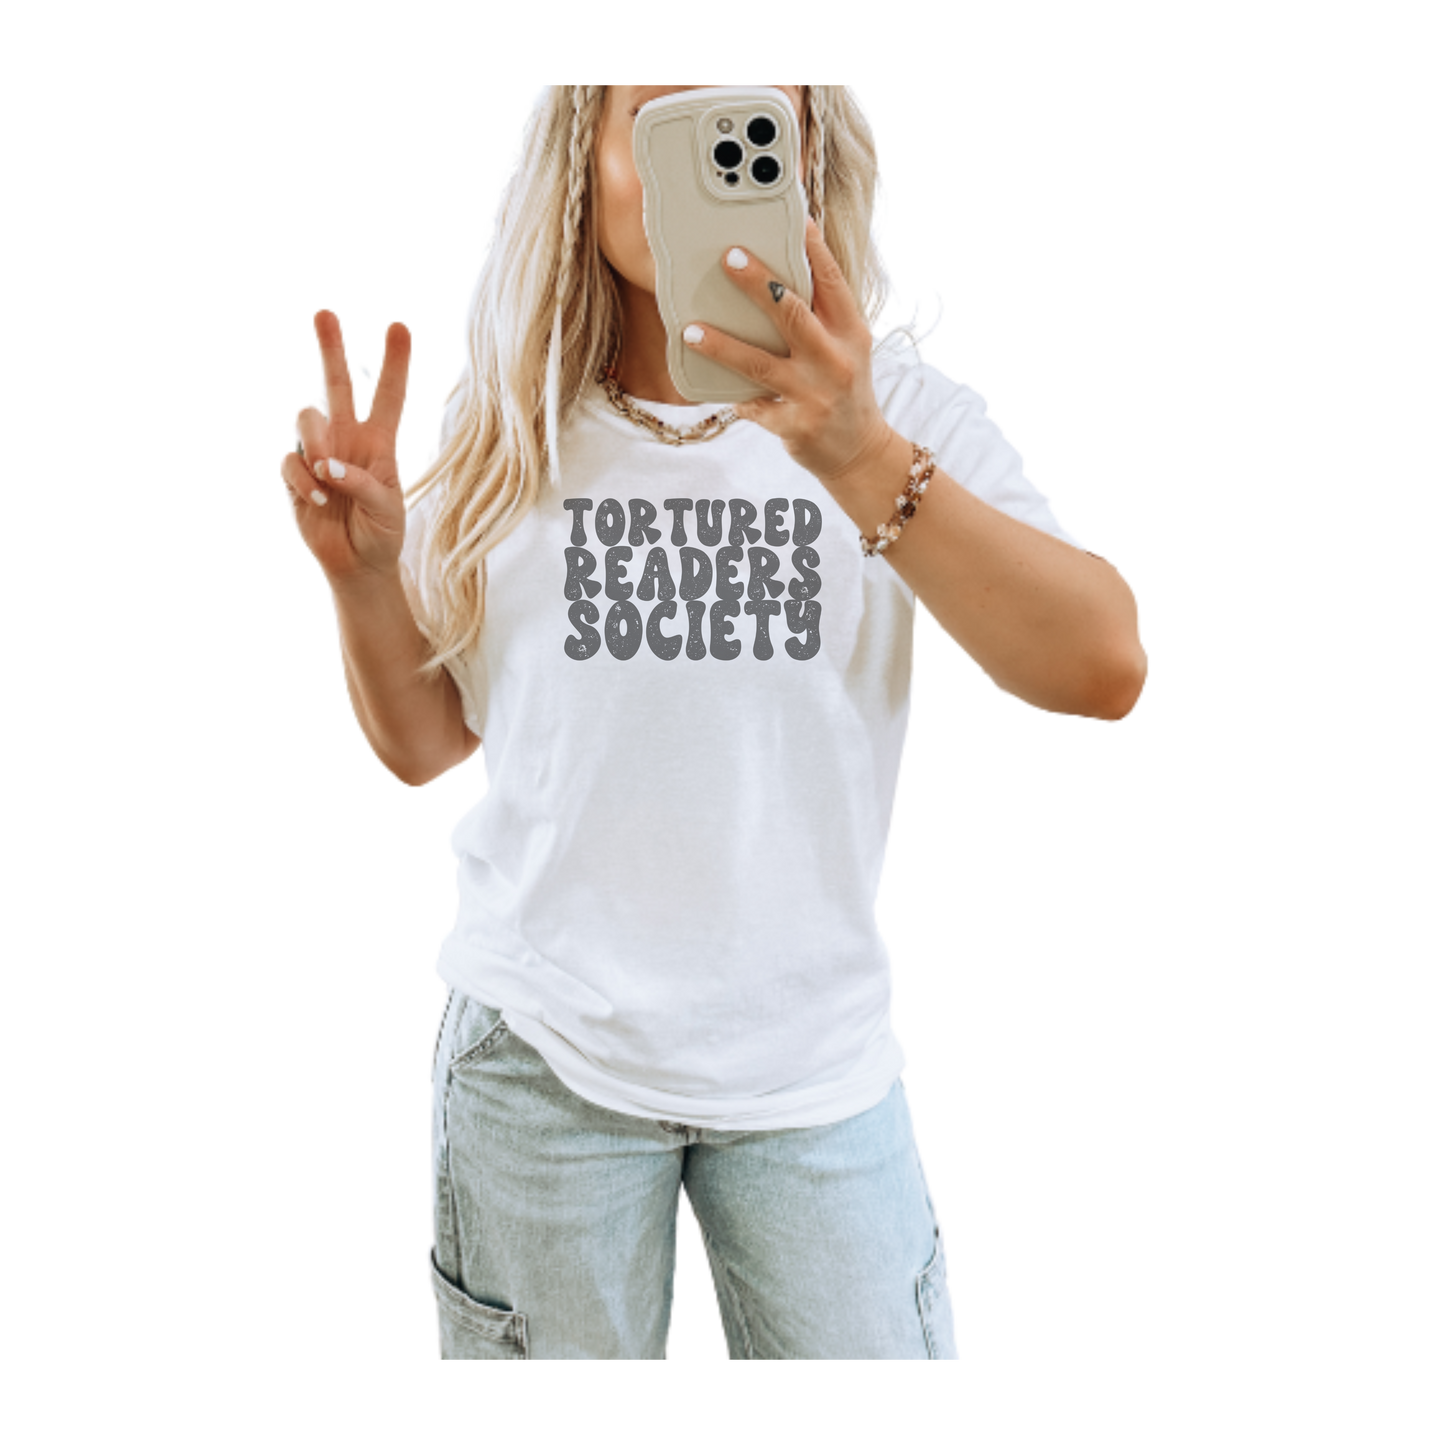 Tortured Readers Society T-shirt